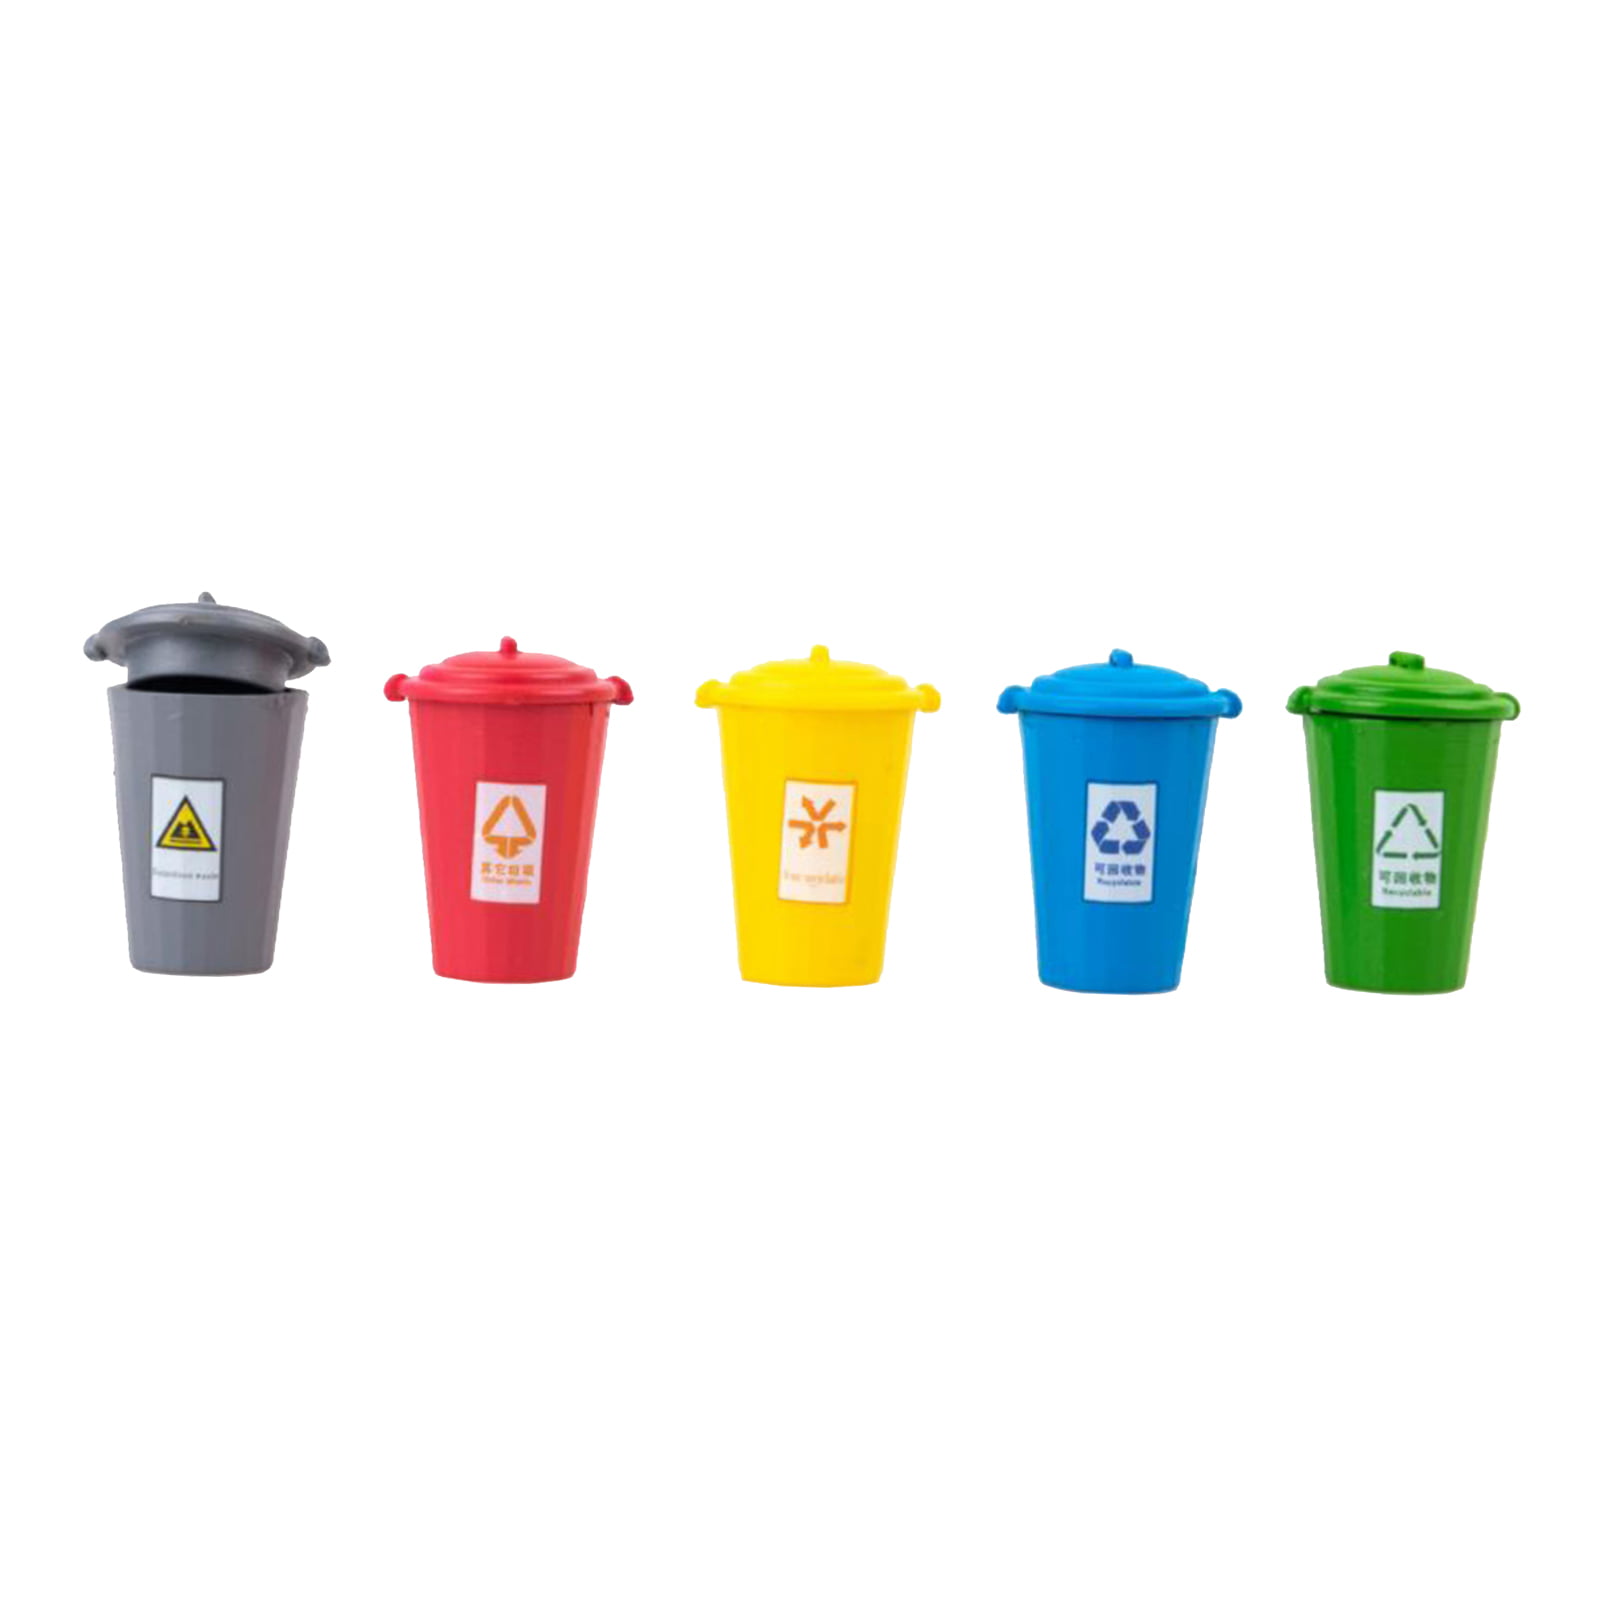 Clean Cubes 30 Gallon Disposable Sanitary Trash Cans & Recycling 